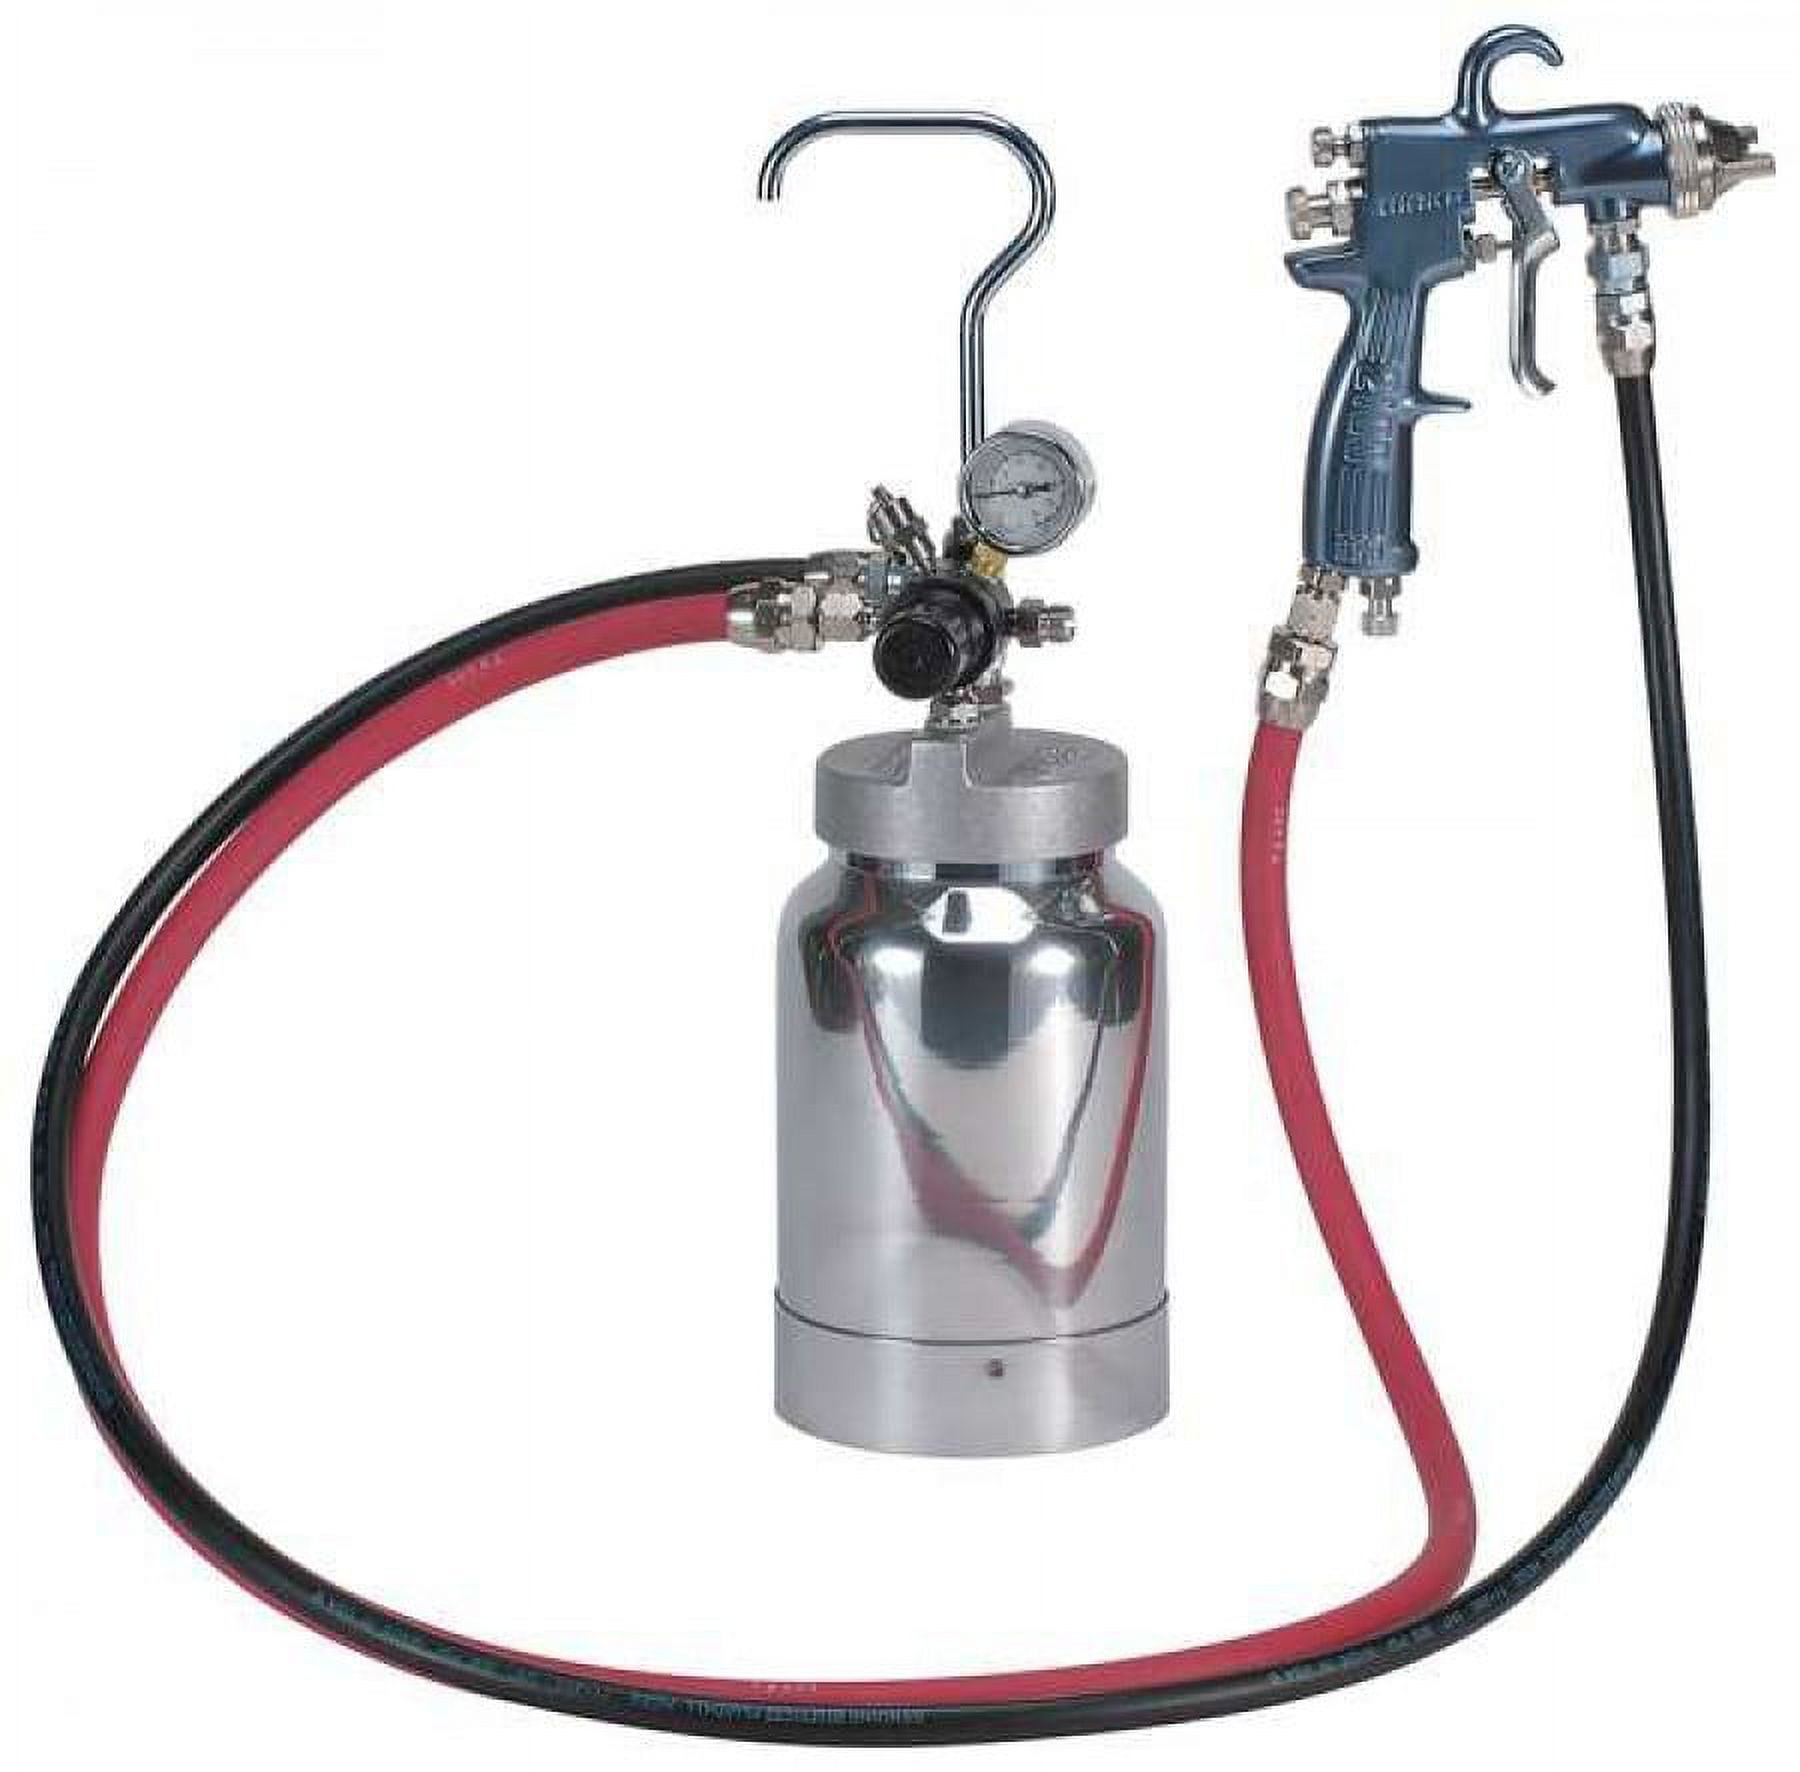 SPRAY GUN FOR PAINTING TOP CONTAINER - merXu - Negotiate prices! Wholesale  purchases!